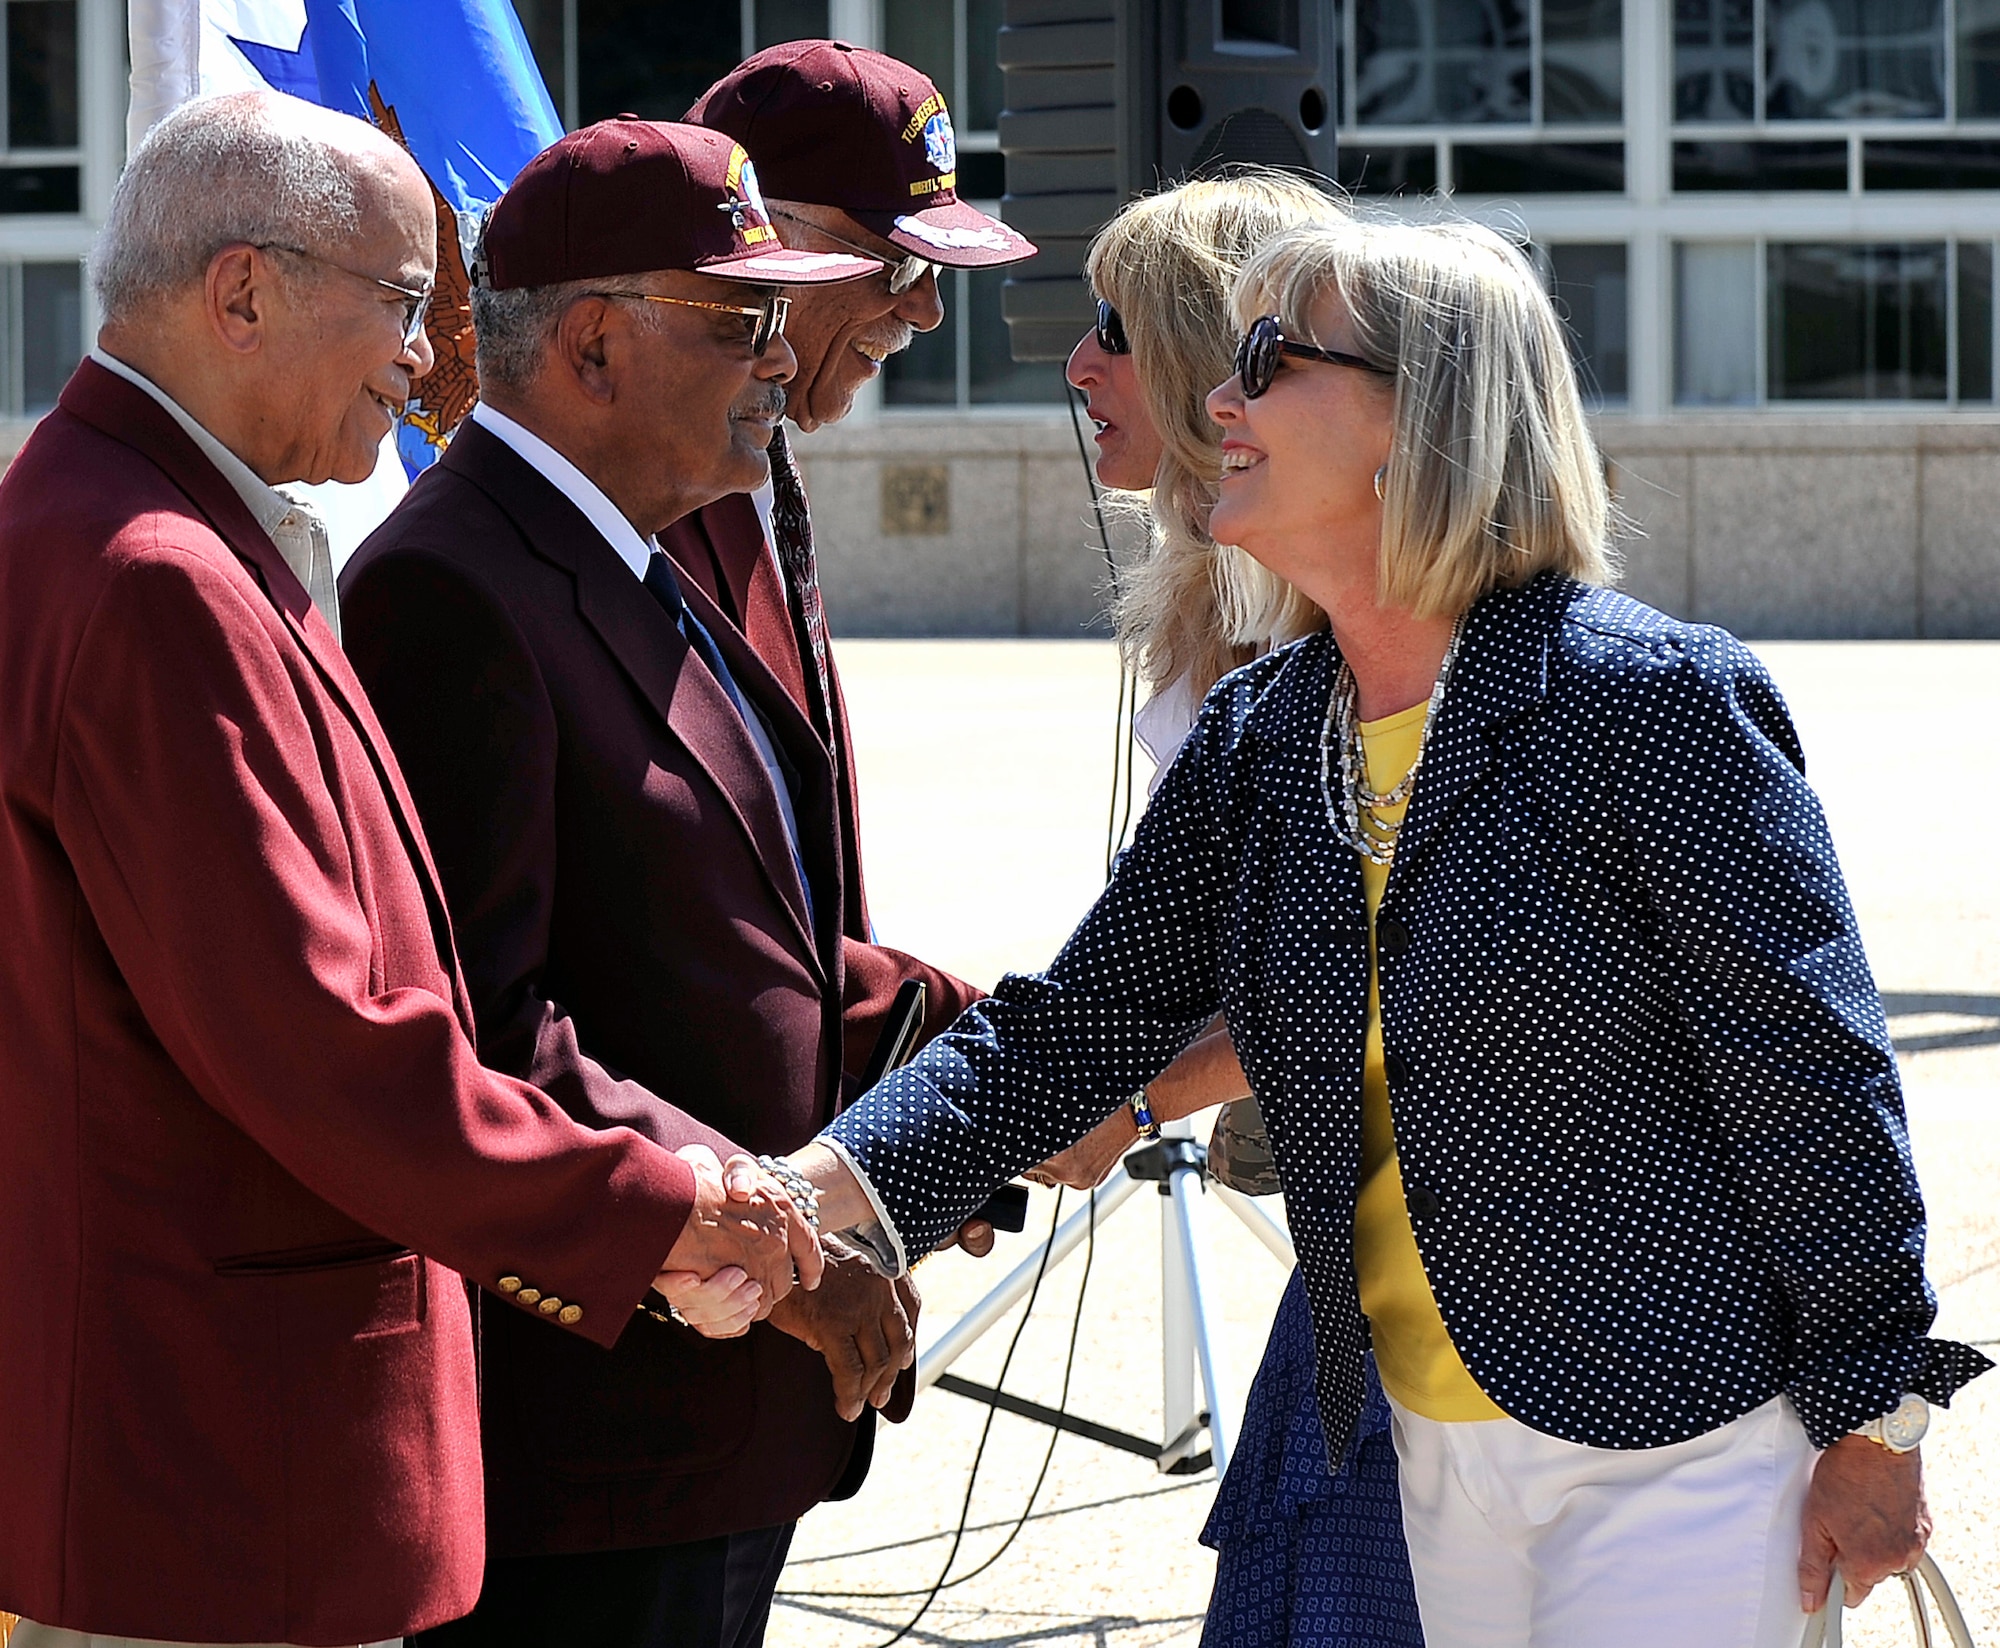 Suzie Schwartz and Paula Gould thank former Aviation Cadet Randy Edwards, former 2nd Lt. Franklin Macon and retired Capt. Sam Hunter, Jr. for their service to the United States during a ceremony at the Air Force Academy July 22, 2011. The Academy hosted the ceremony to present a replacement bronze Tuskegee Airman medal replica to Macon, whose original replica was stolen in a home burglary May 31. Schwartz is the wife of Air Force Chief of Staff Gen. Norton Schwartz, and Gould is the wife of Academy Superintendent Lt. Gen. Mike Gould. (U.S. Air Force photo/Ray McCoy)